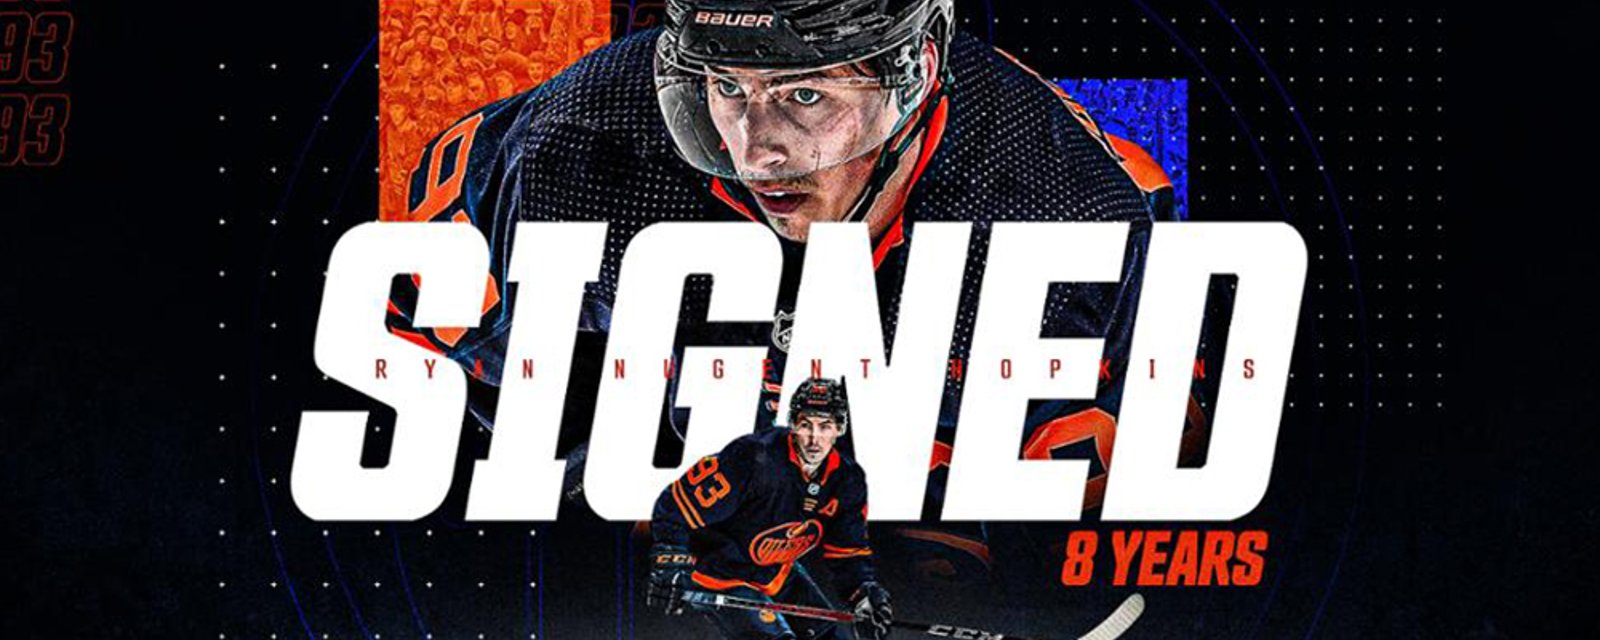 Oilers officially sign Nugent-Hopkins to a long-term deal